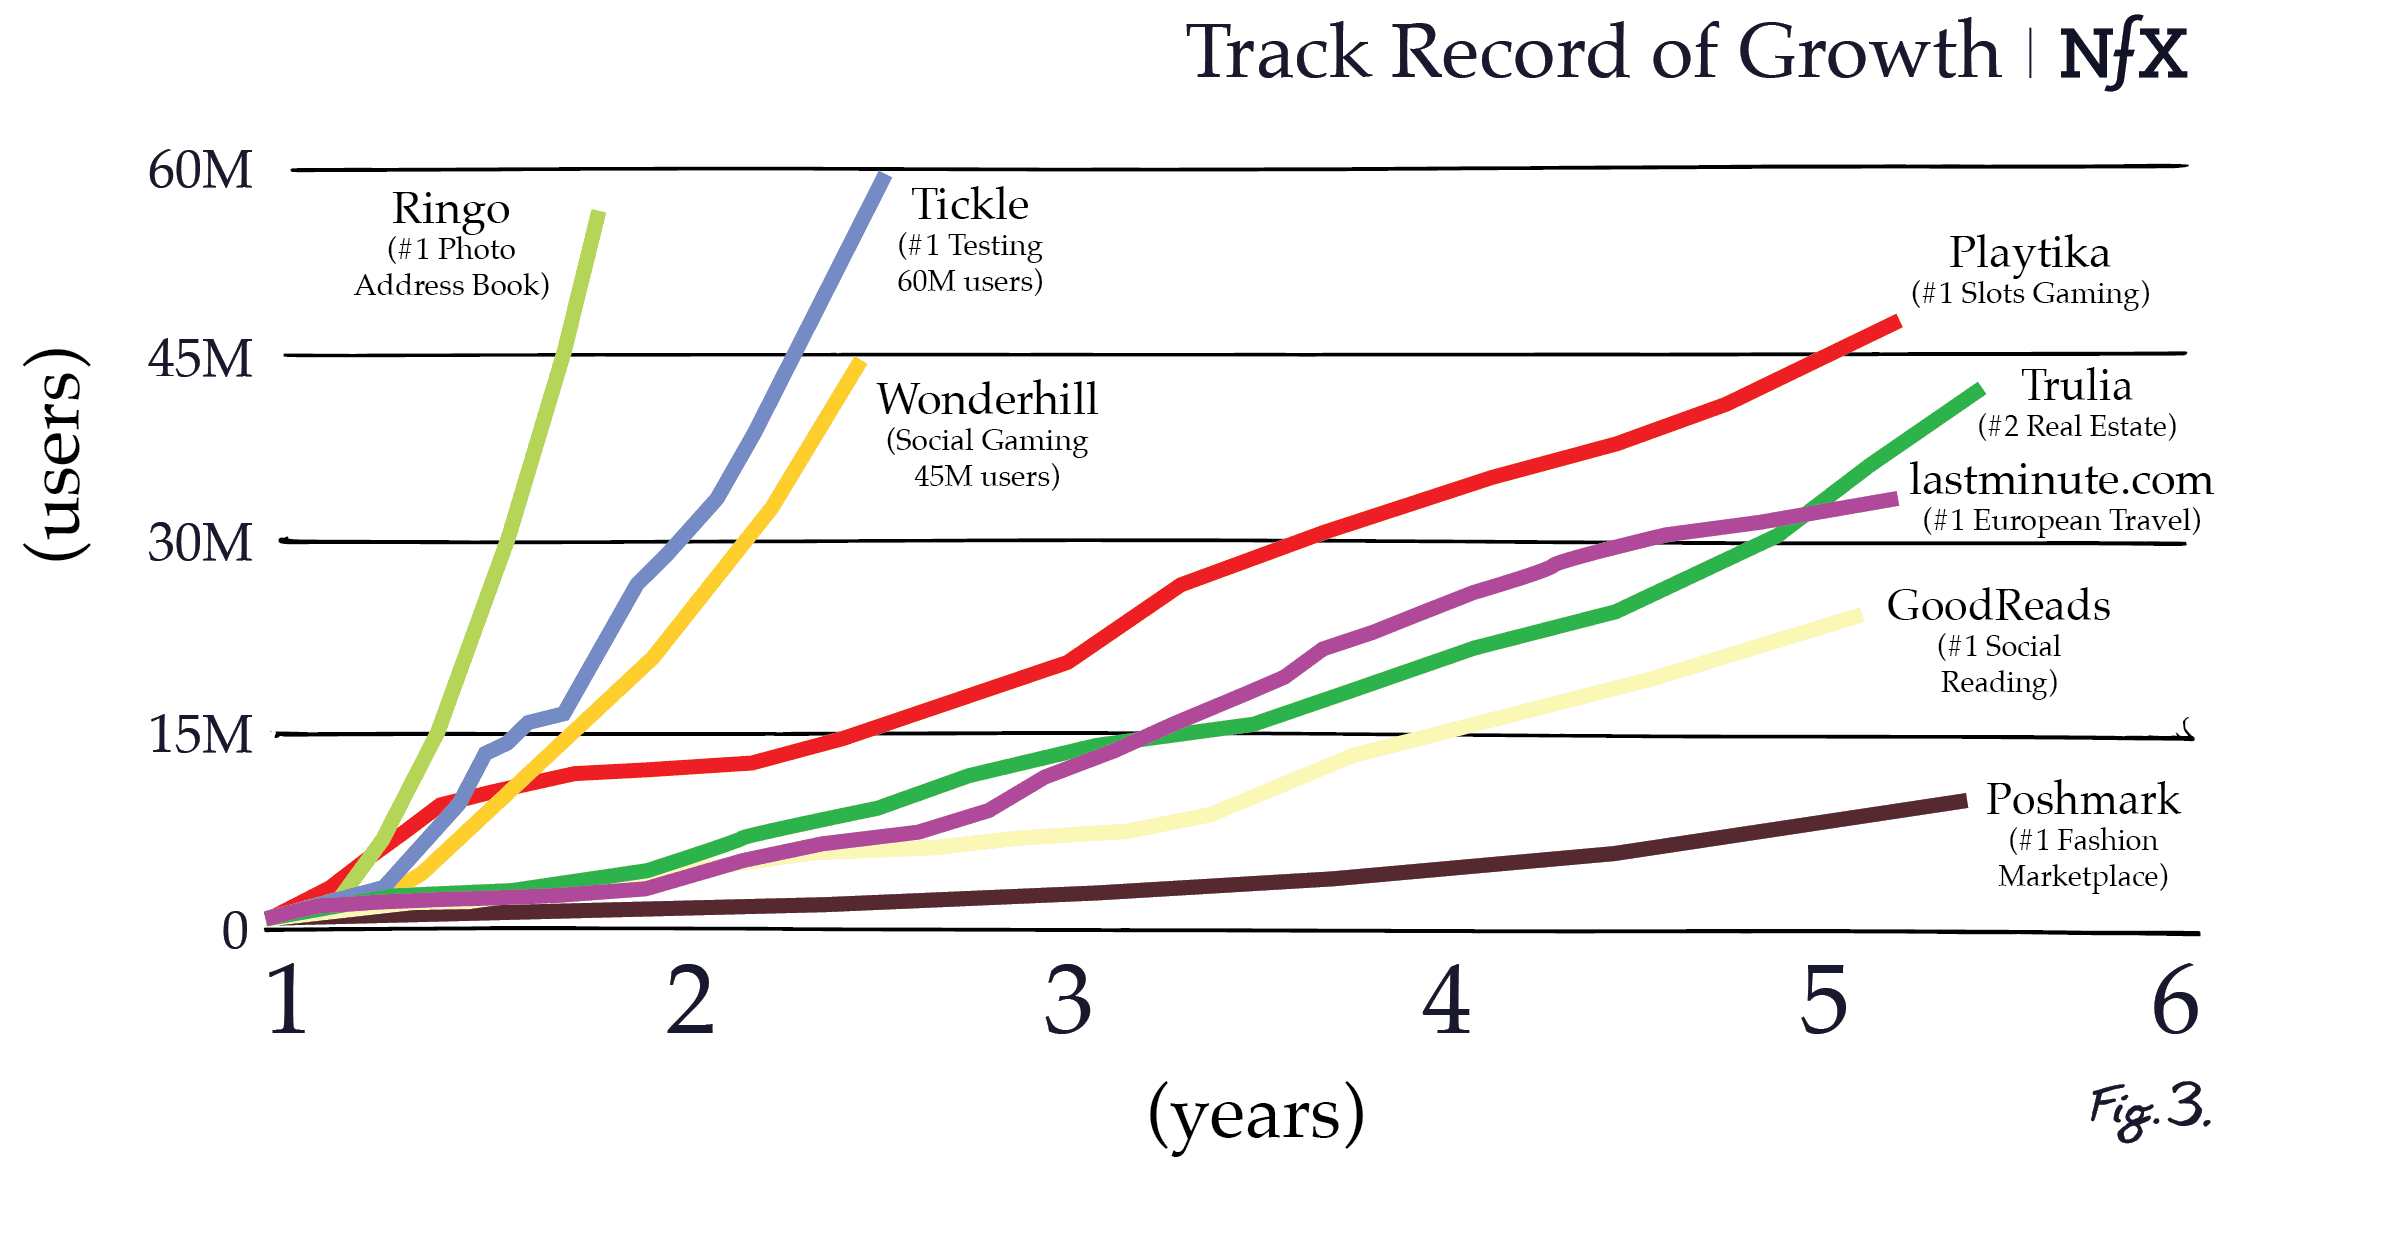 Track Record Of Growth - NFX Essay